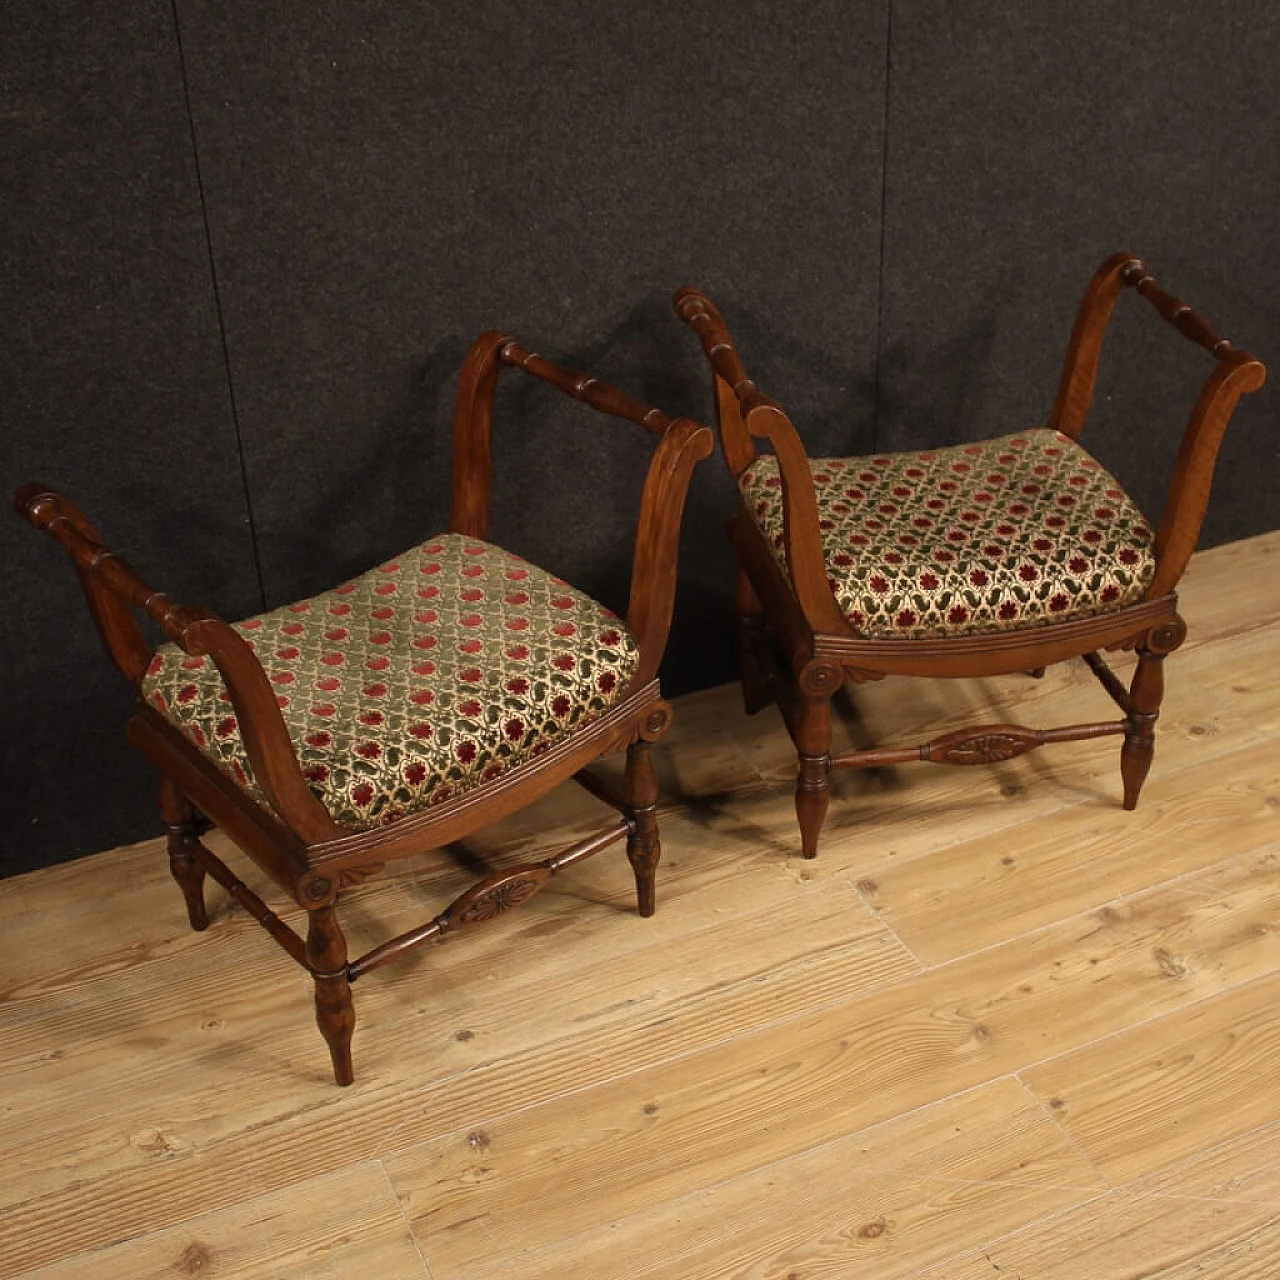 Pair of Charles X benches in carved walnut and floral fabric, 19th century 1116099